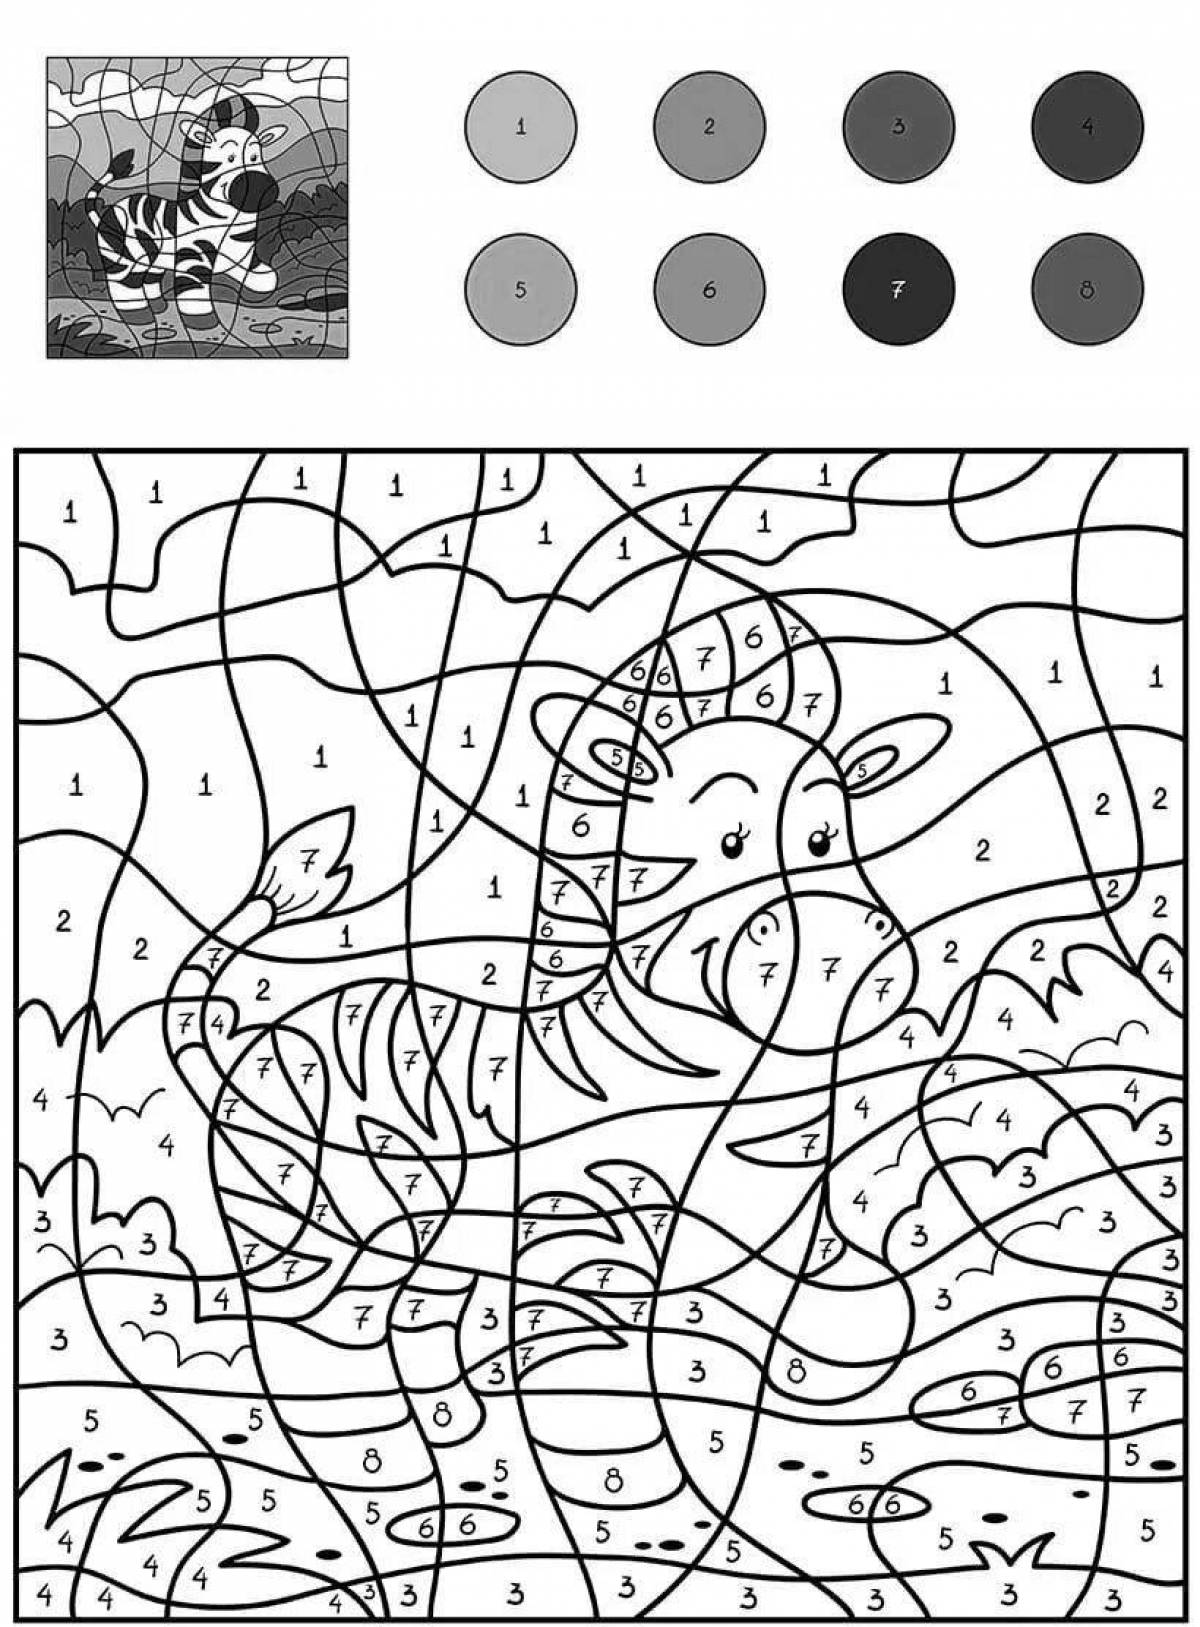 Joyful coloring without paint by numbers